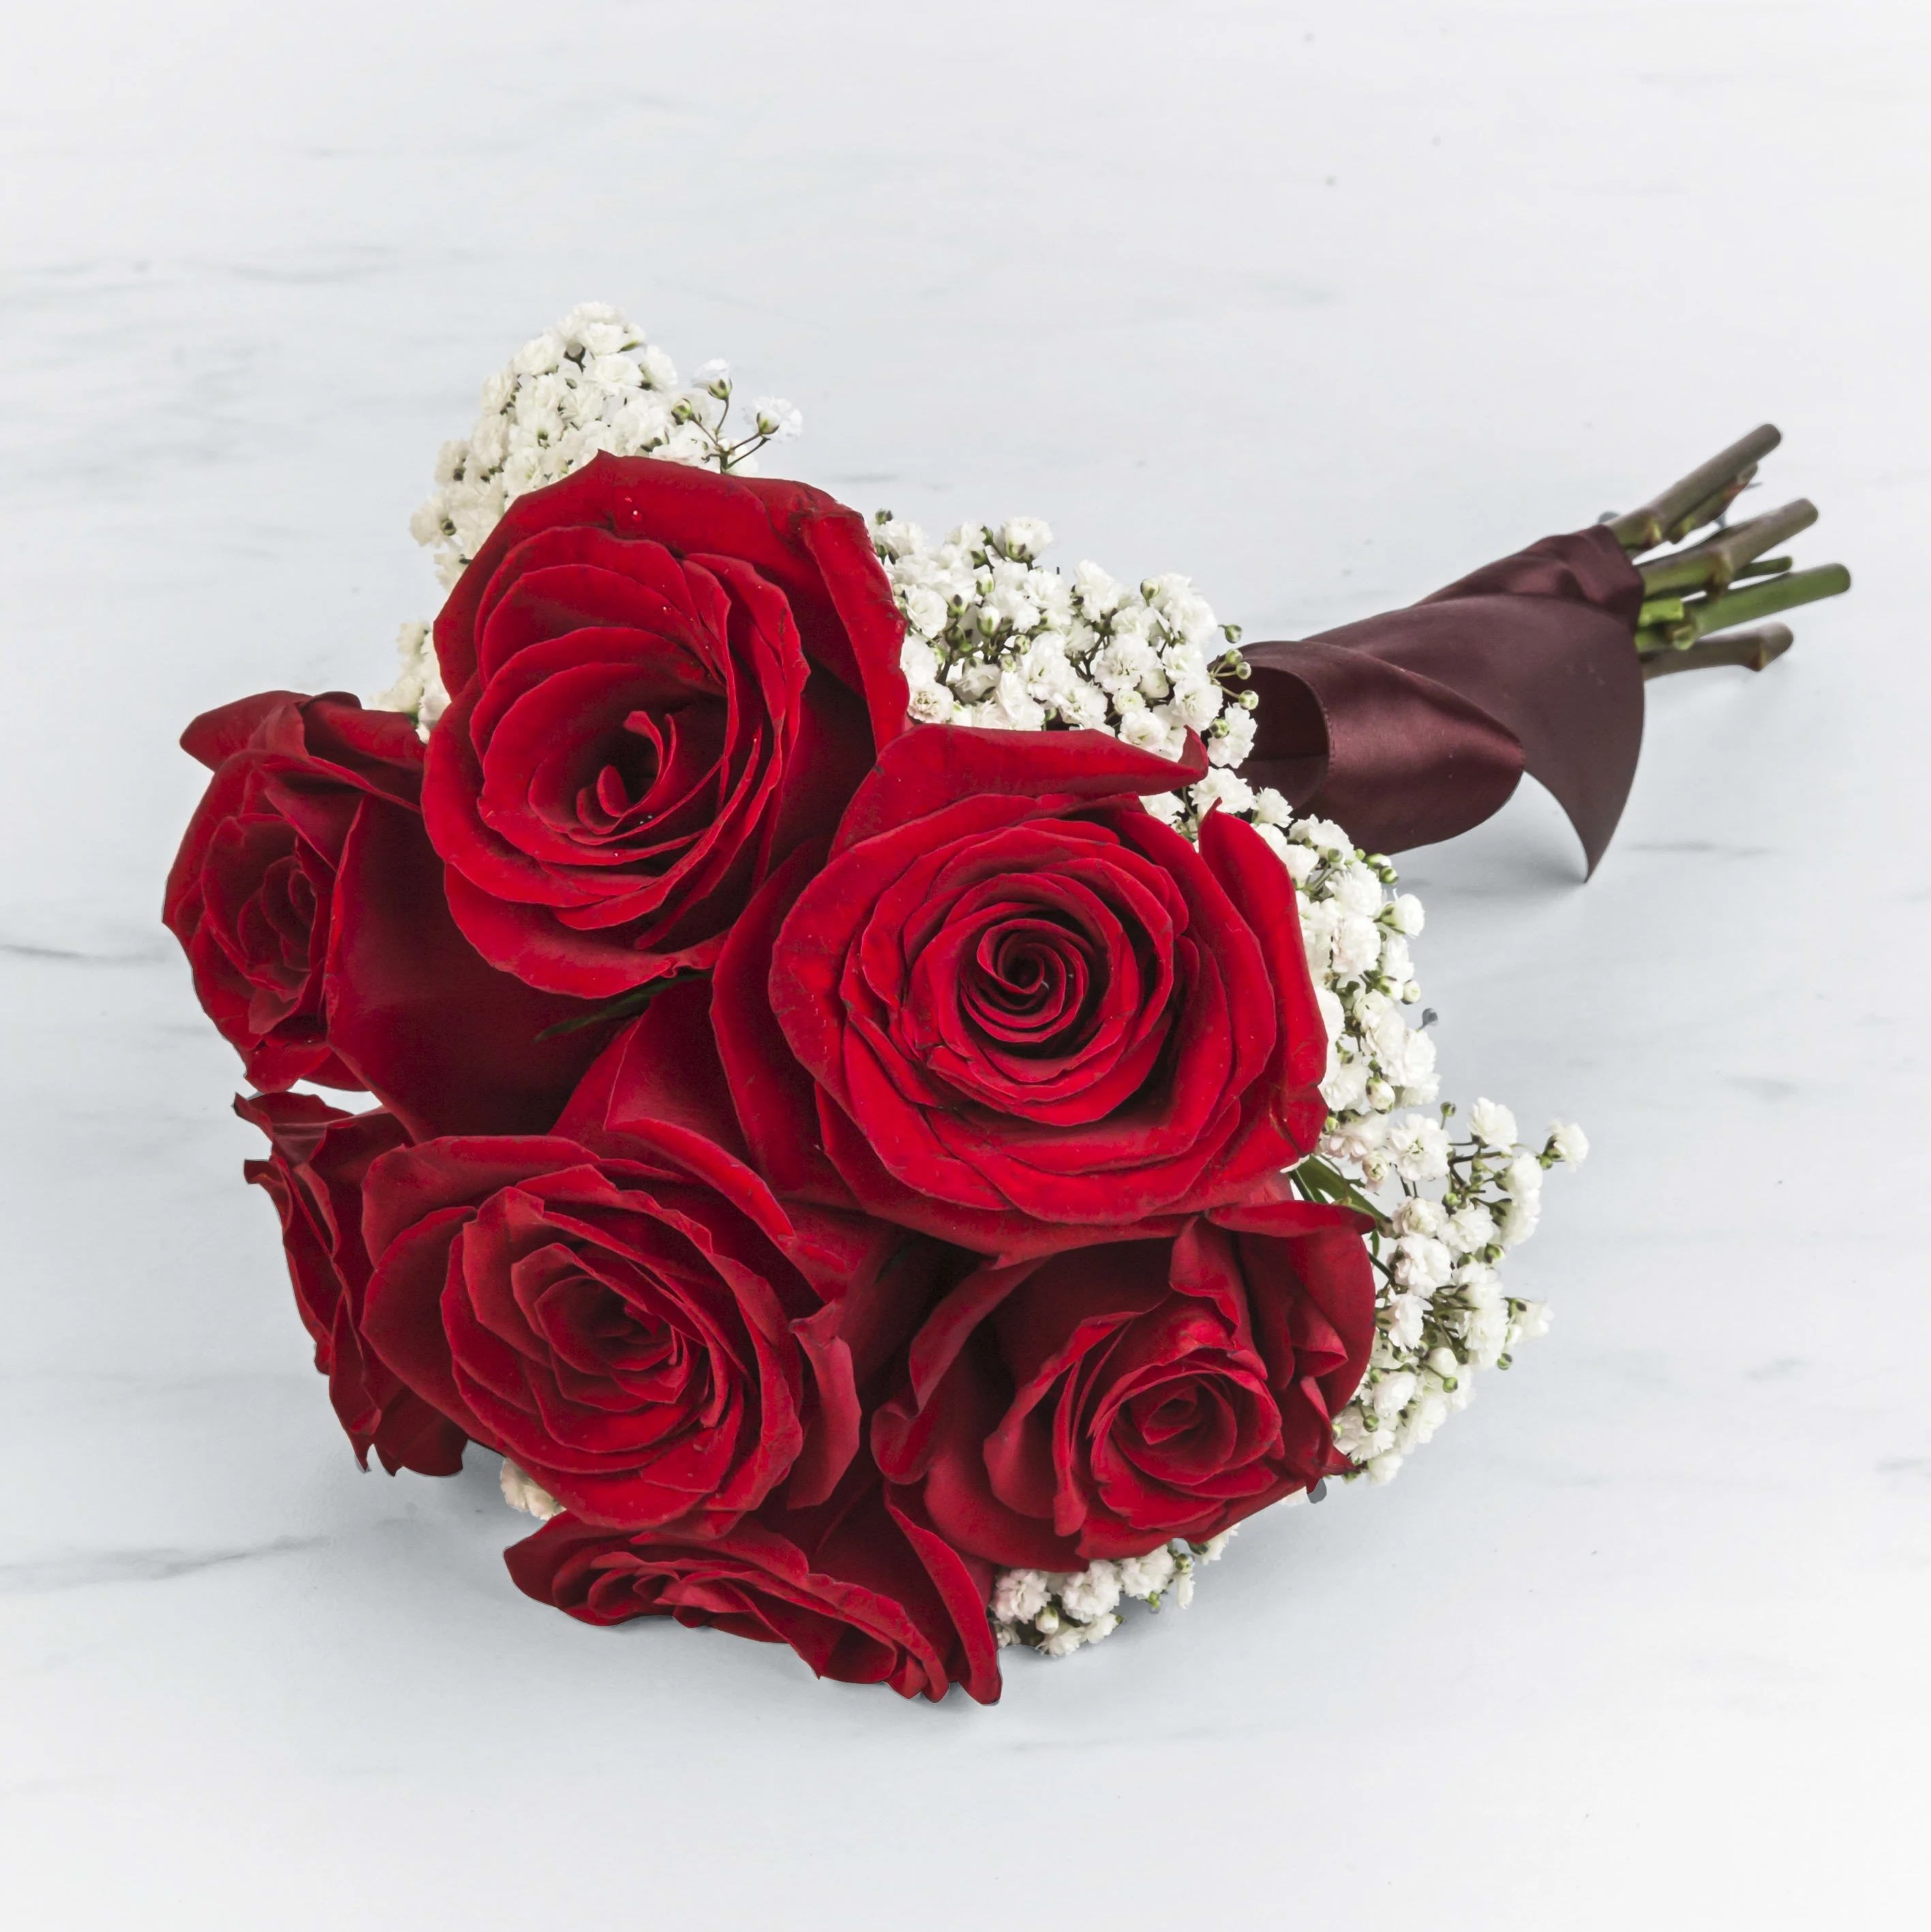 Small and Petite Red Rose Bouquet - Whether you're walking down the aisle, going to Prom, or even going to a formal event!  A Classic Red Rose bouquet hand tied with ribbon. The perfect accessory for Proms, Weddings, and Debutante Ball.  7 Red Roses with a Bunch of Baby's Breath   *Wrapped in Ribbon of your color choice. Please specify which color of mesh you want in the check out notes. If specific flowers needed please include in notes at checkout. 